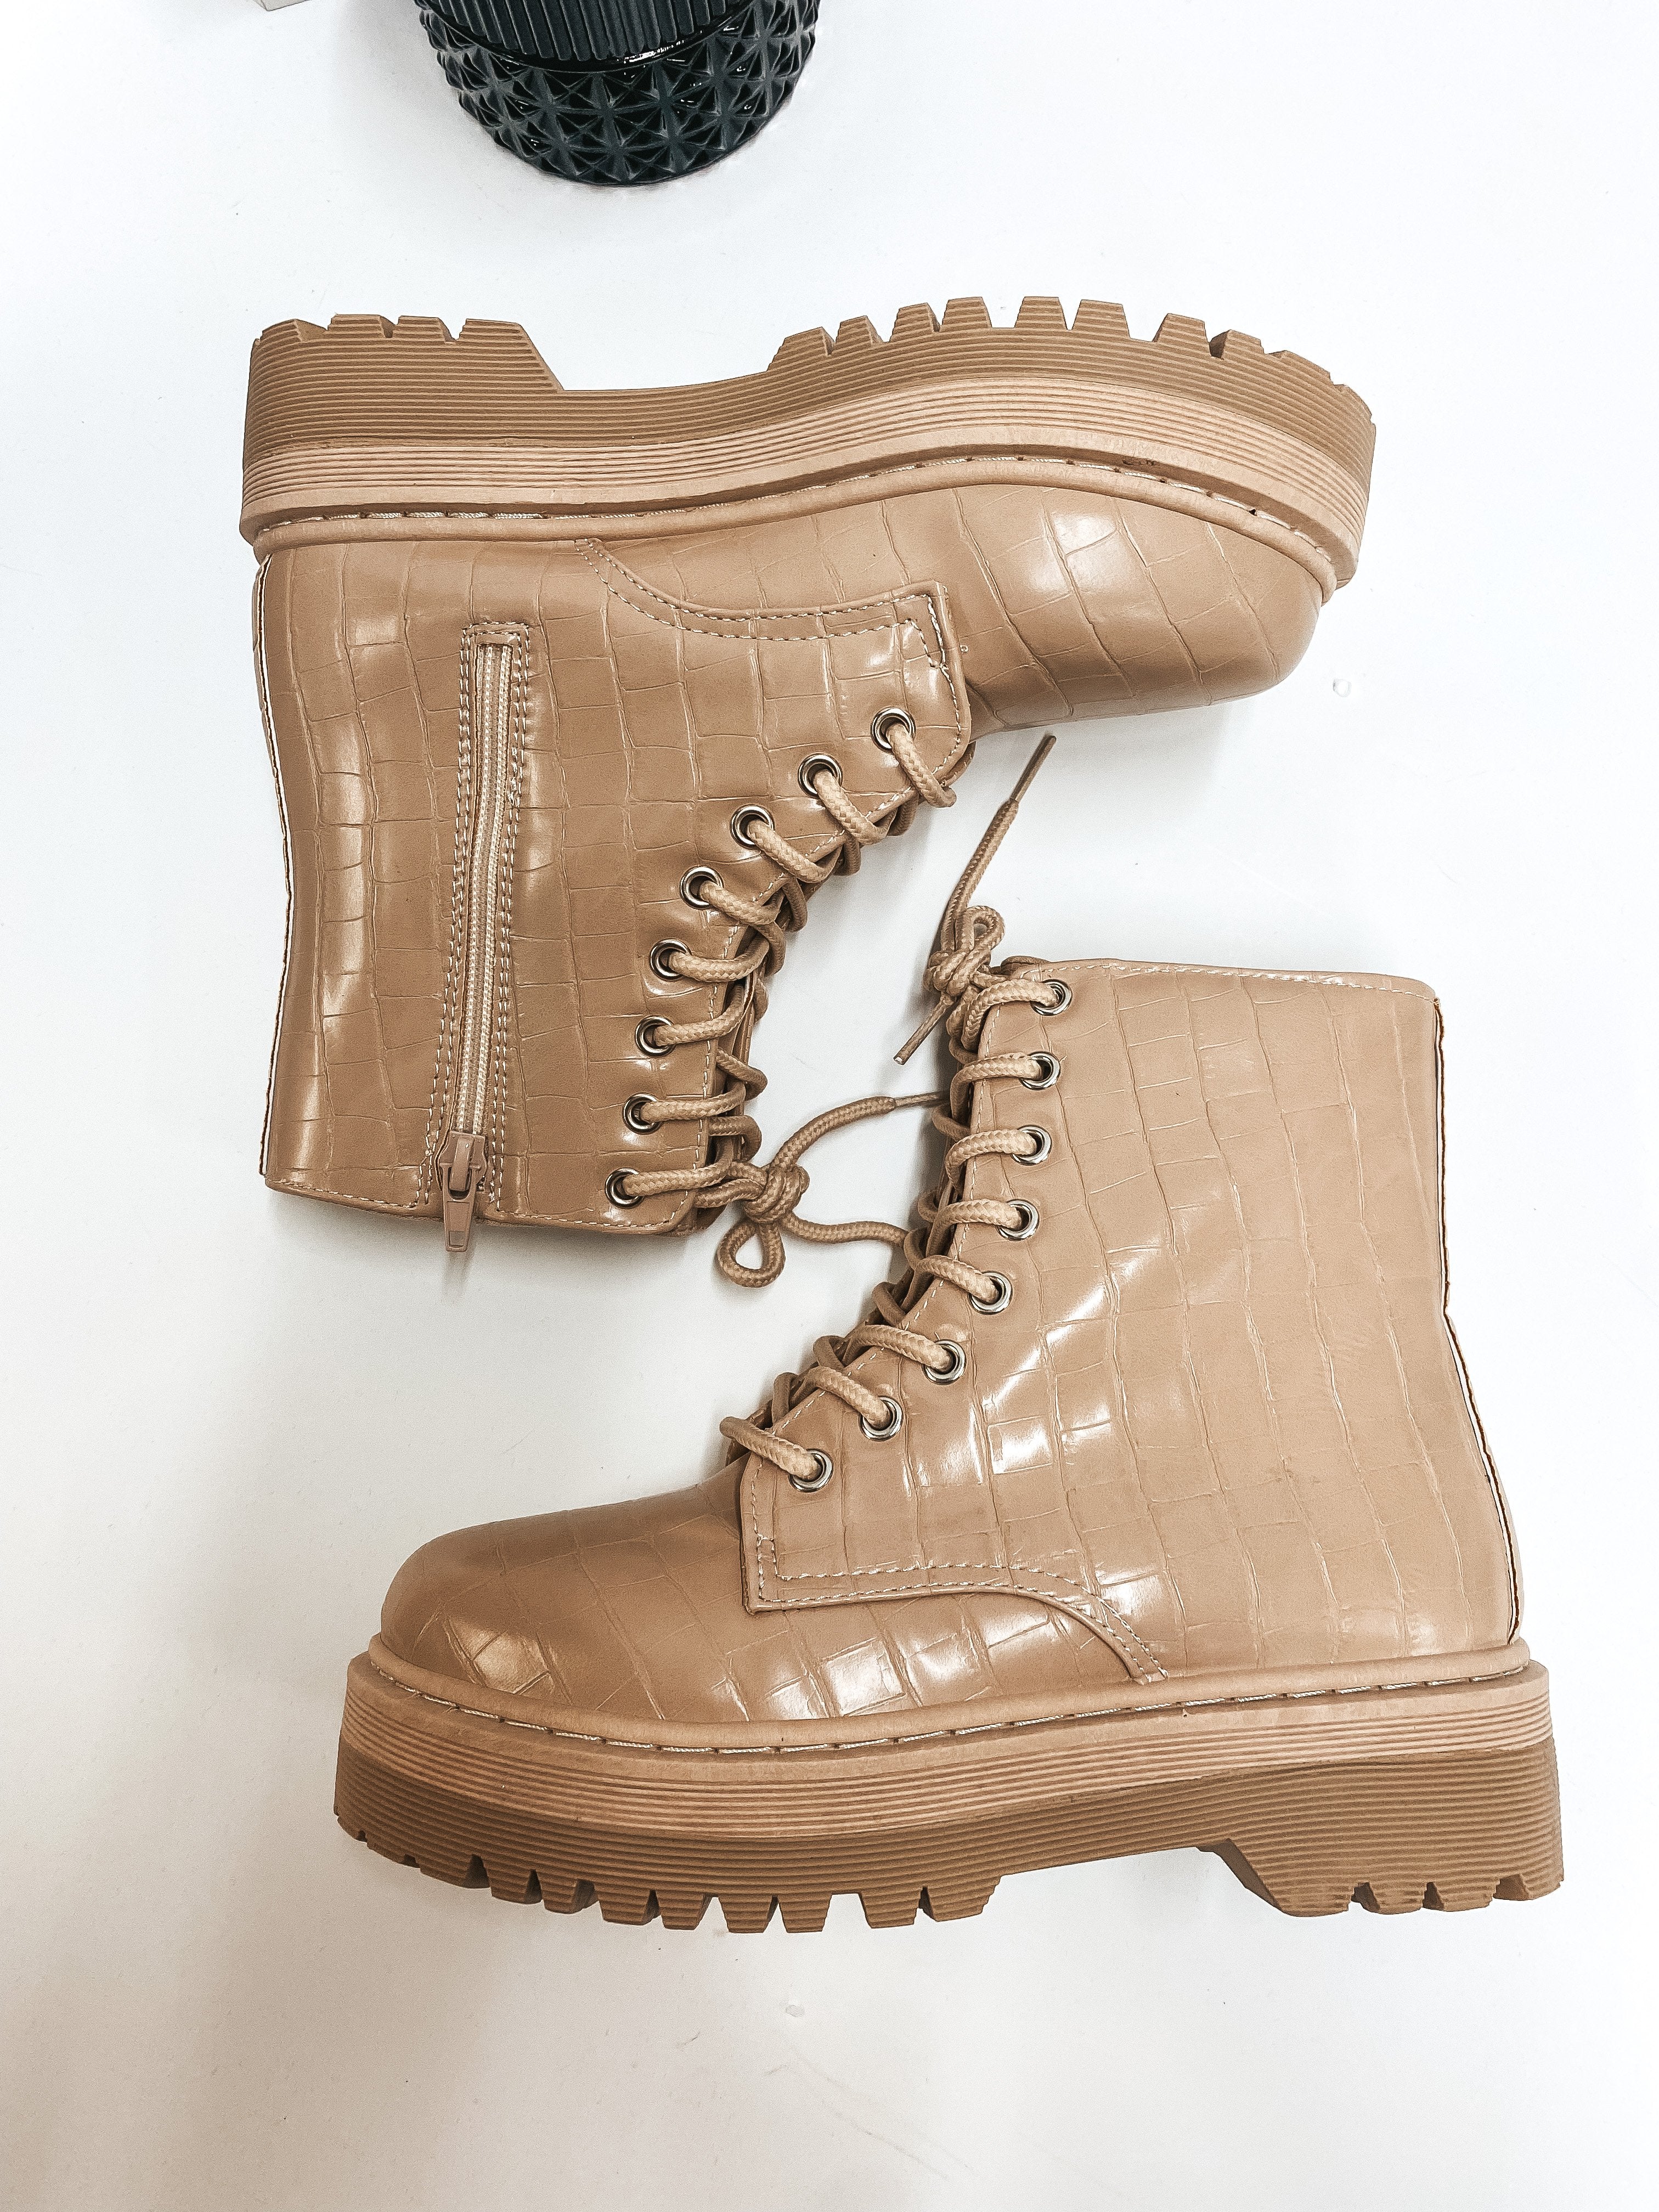 Born to be Wild Combat Boots in Taupe Croc - Giddy Up Glamour Boutique